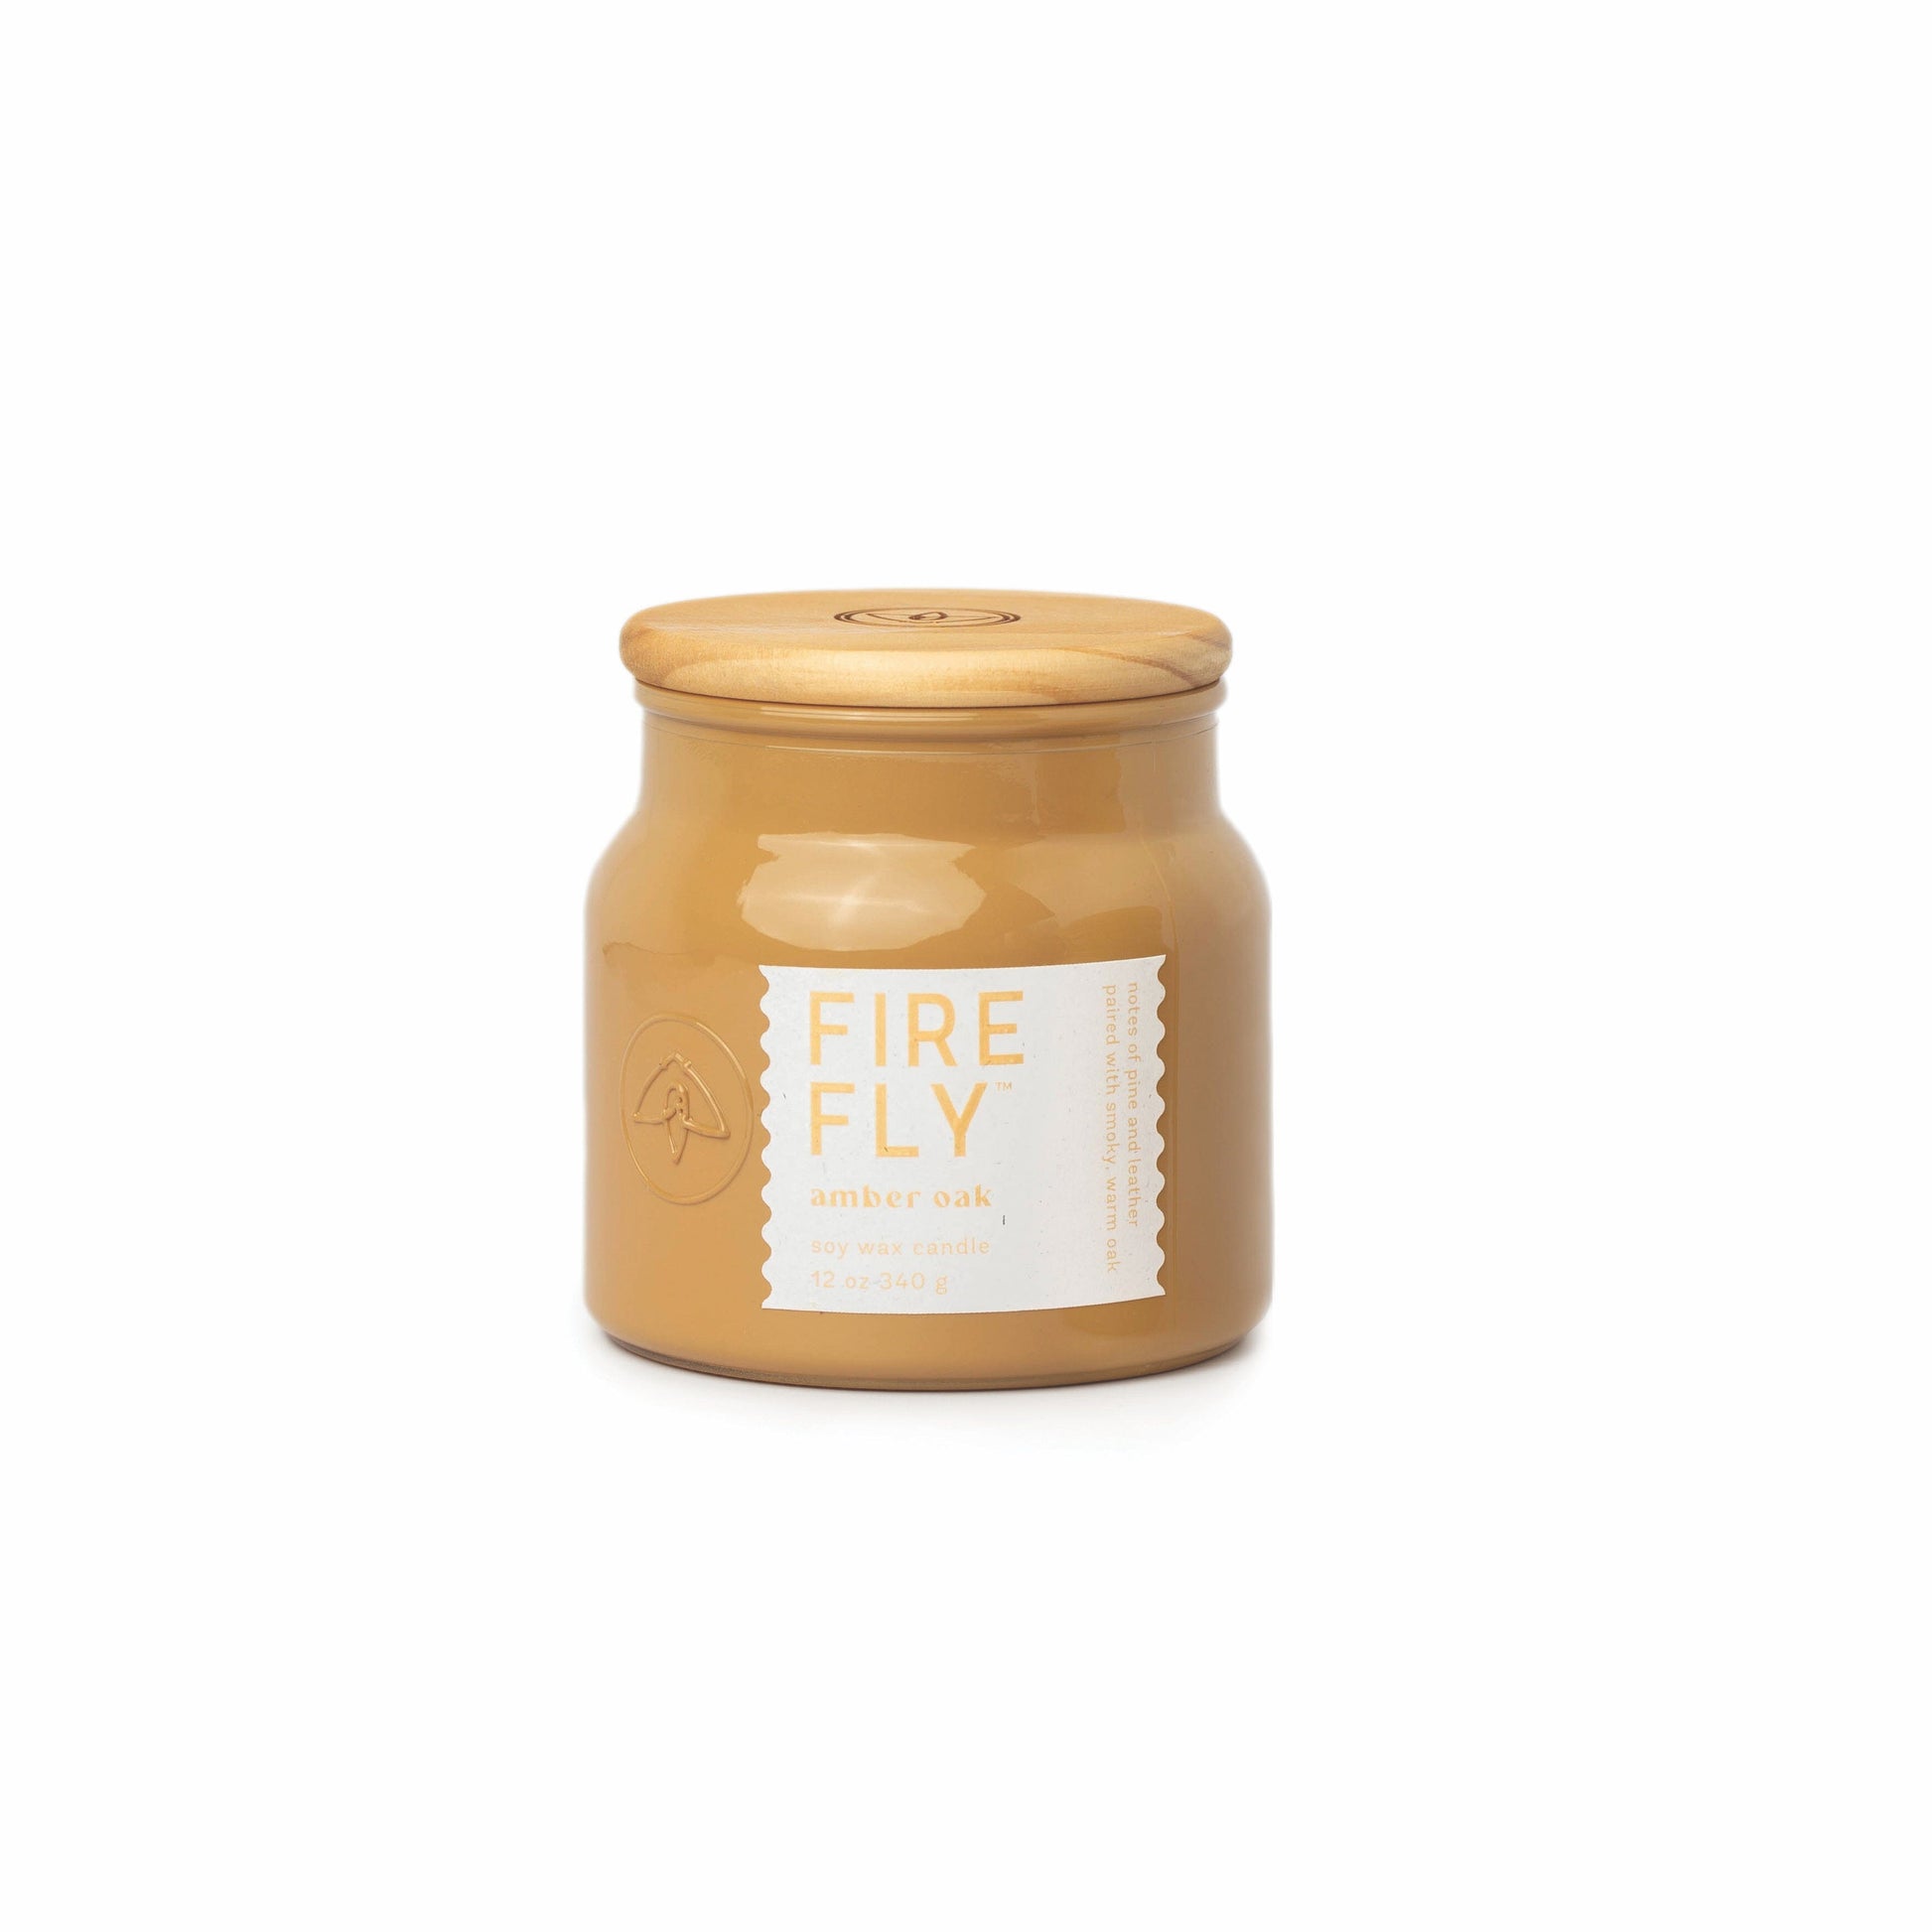 Amber Oak Sol Candle by Firefly 